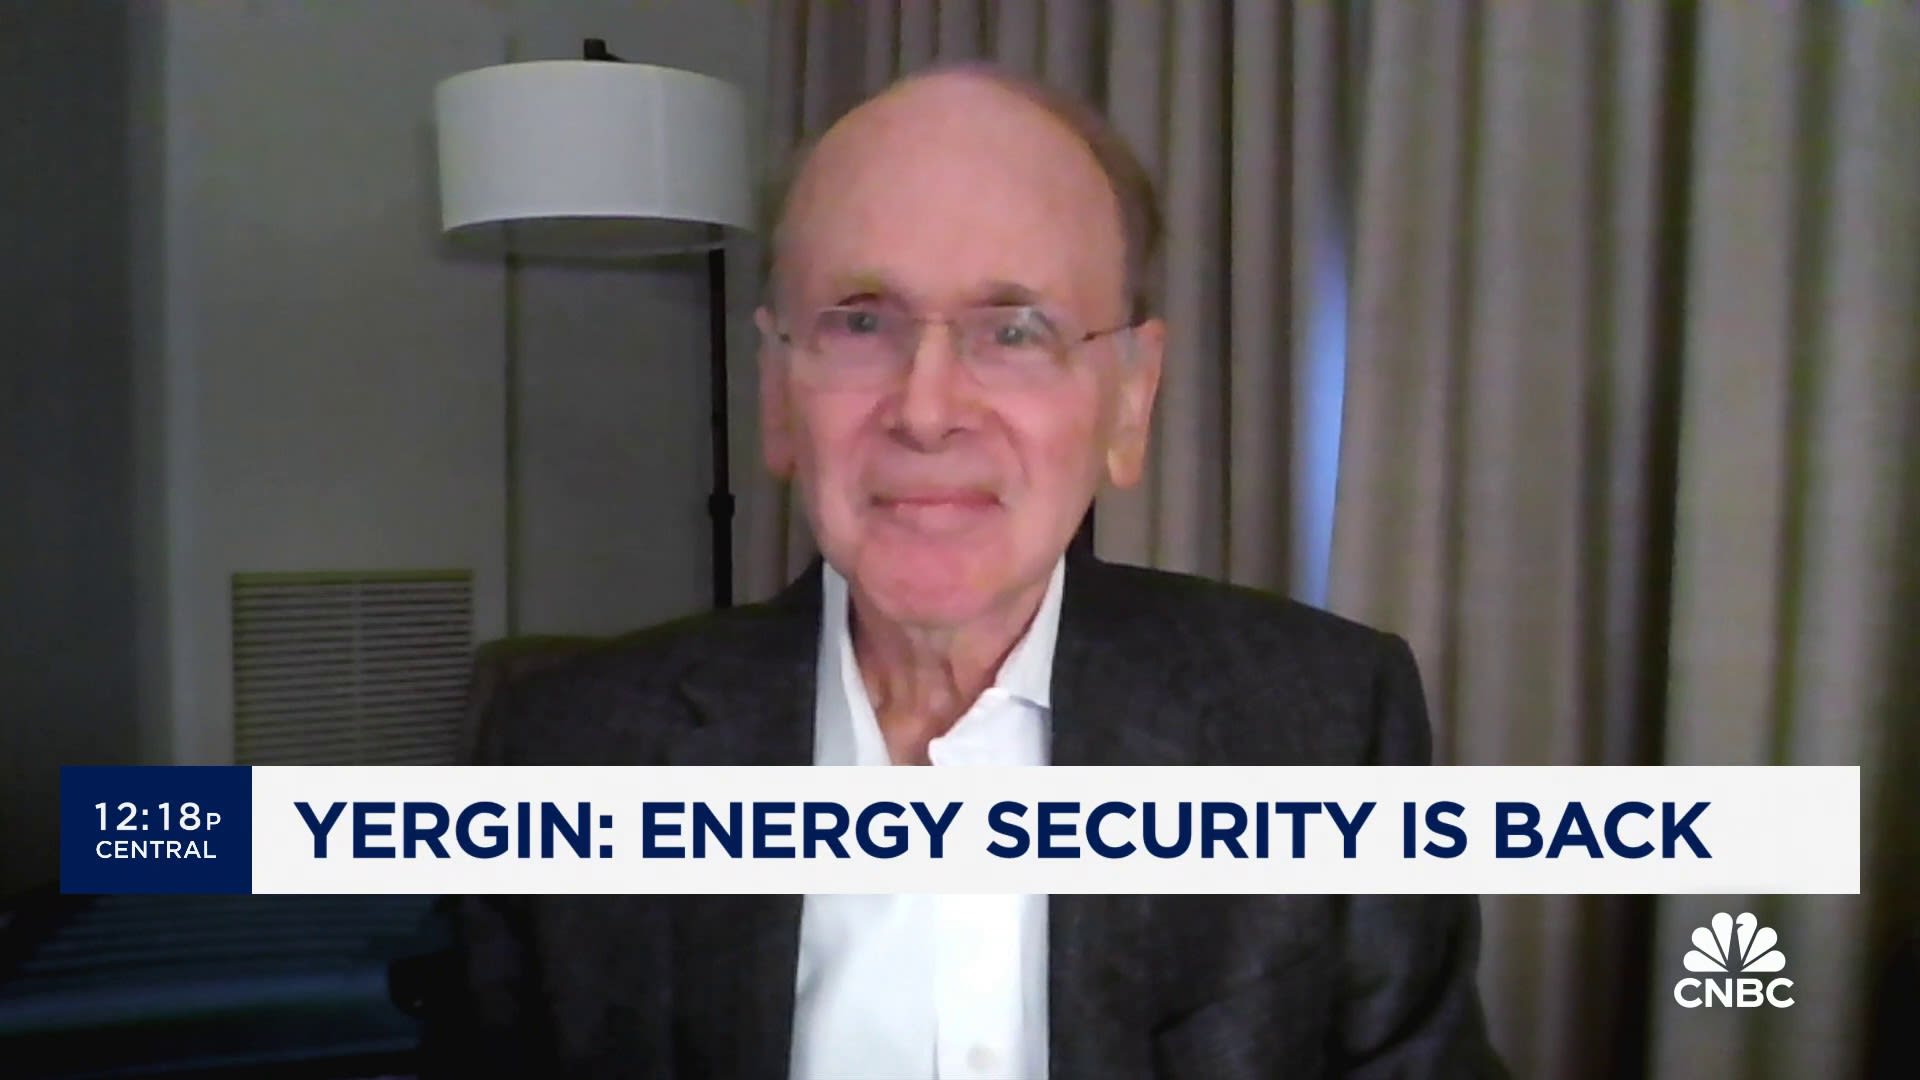 Energy security means affordable and reliable supplies: S&P Global's Dan Yergin